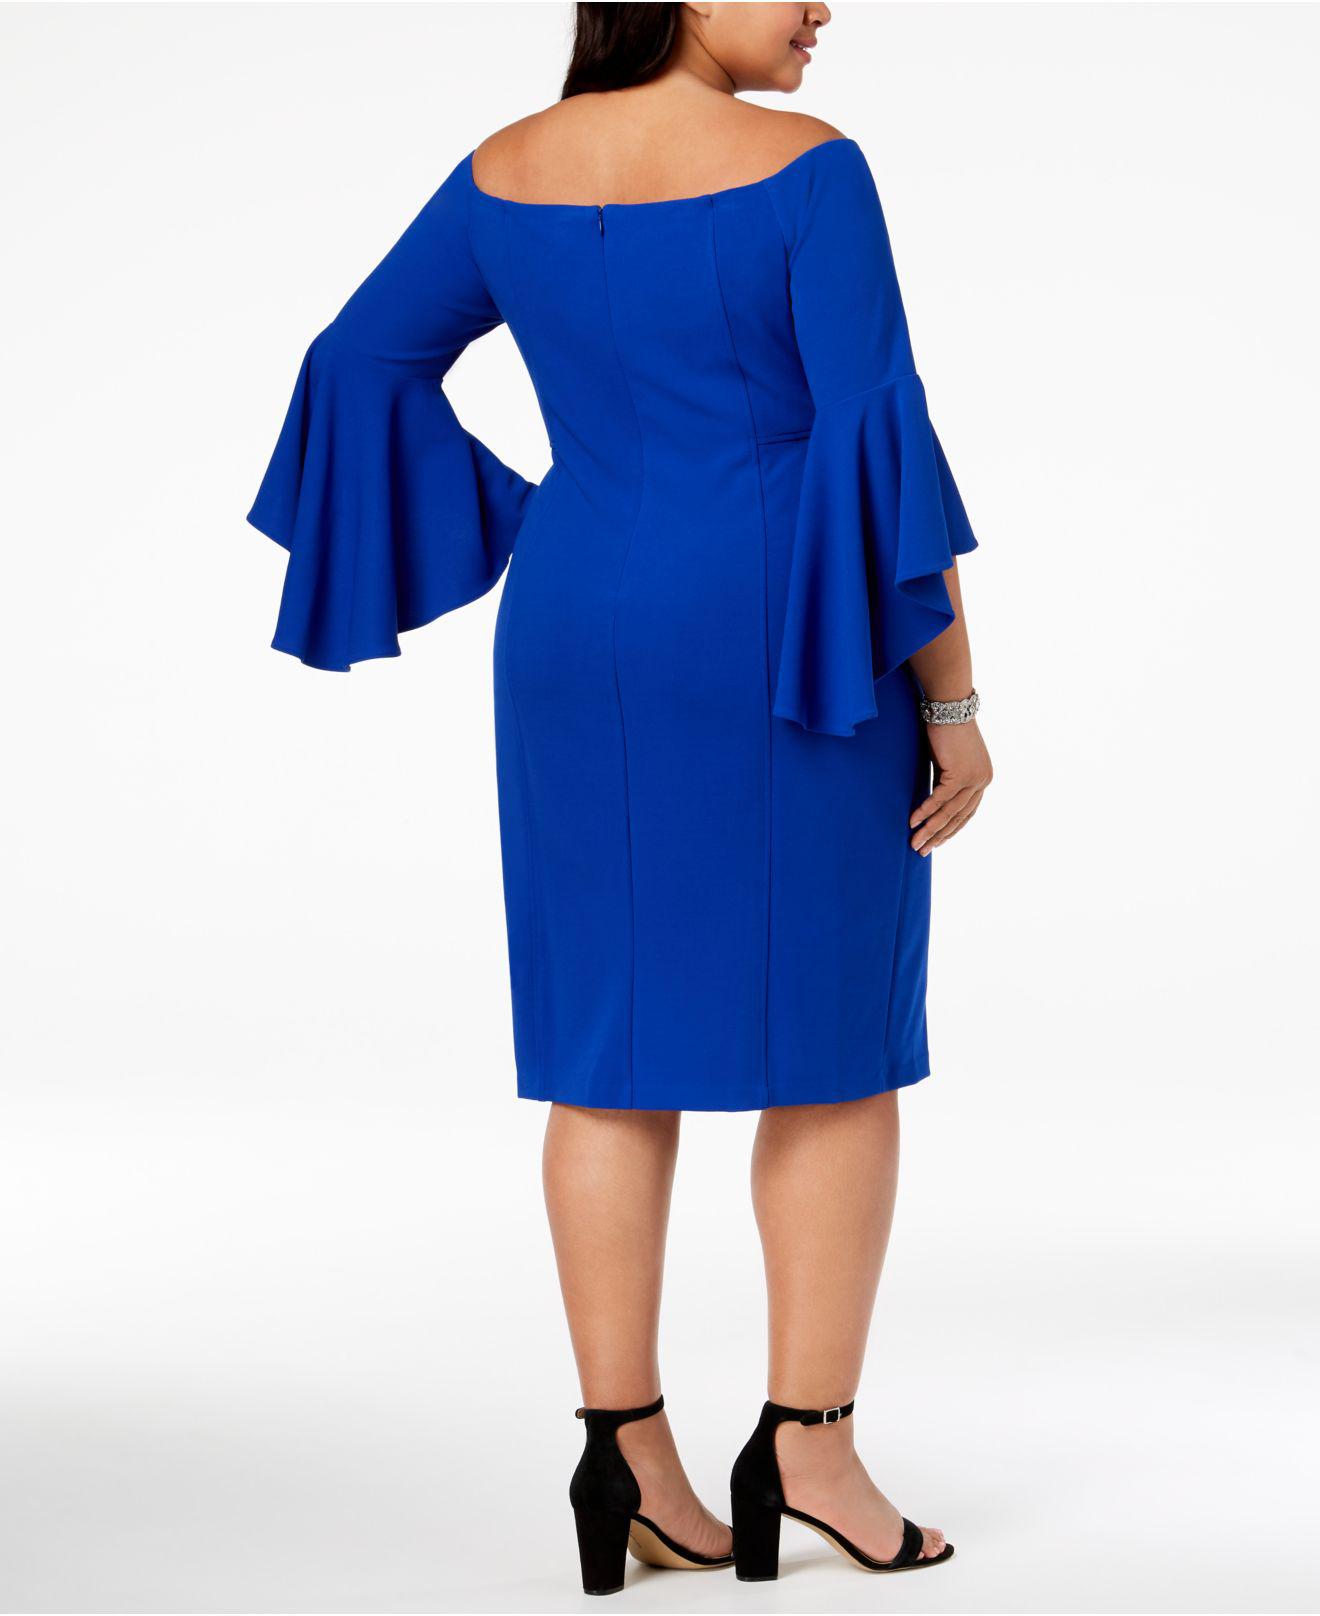 Lyst - R & M Richards Plus Size Off-the-shoulder Flared-sleeve Dress in ...